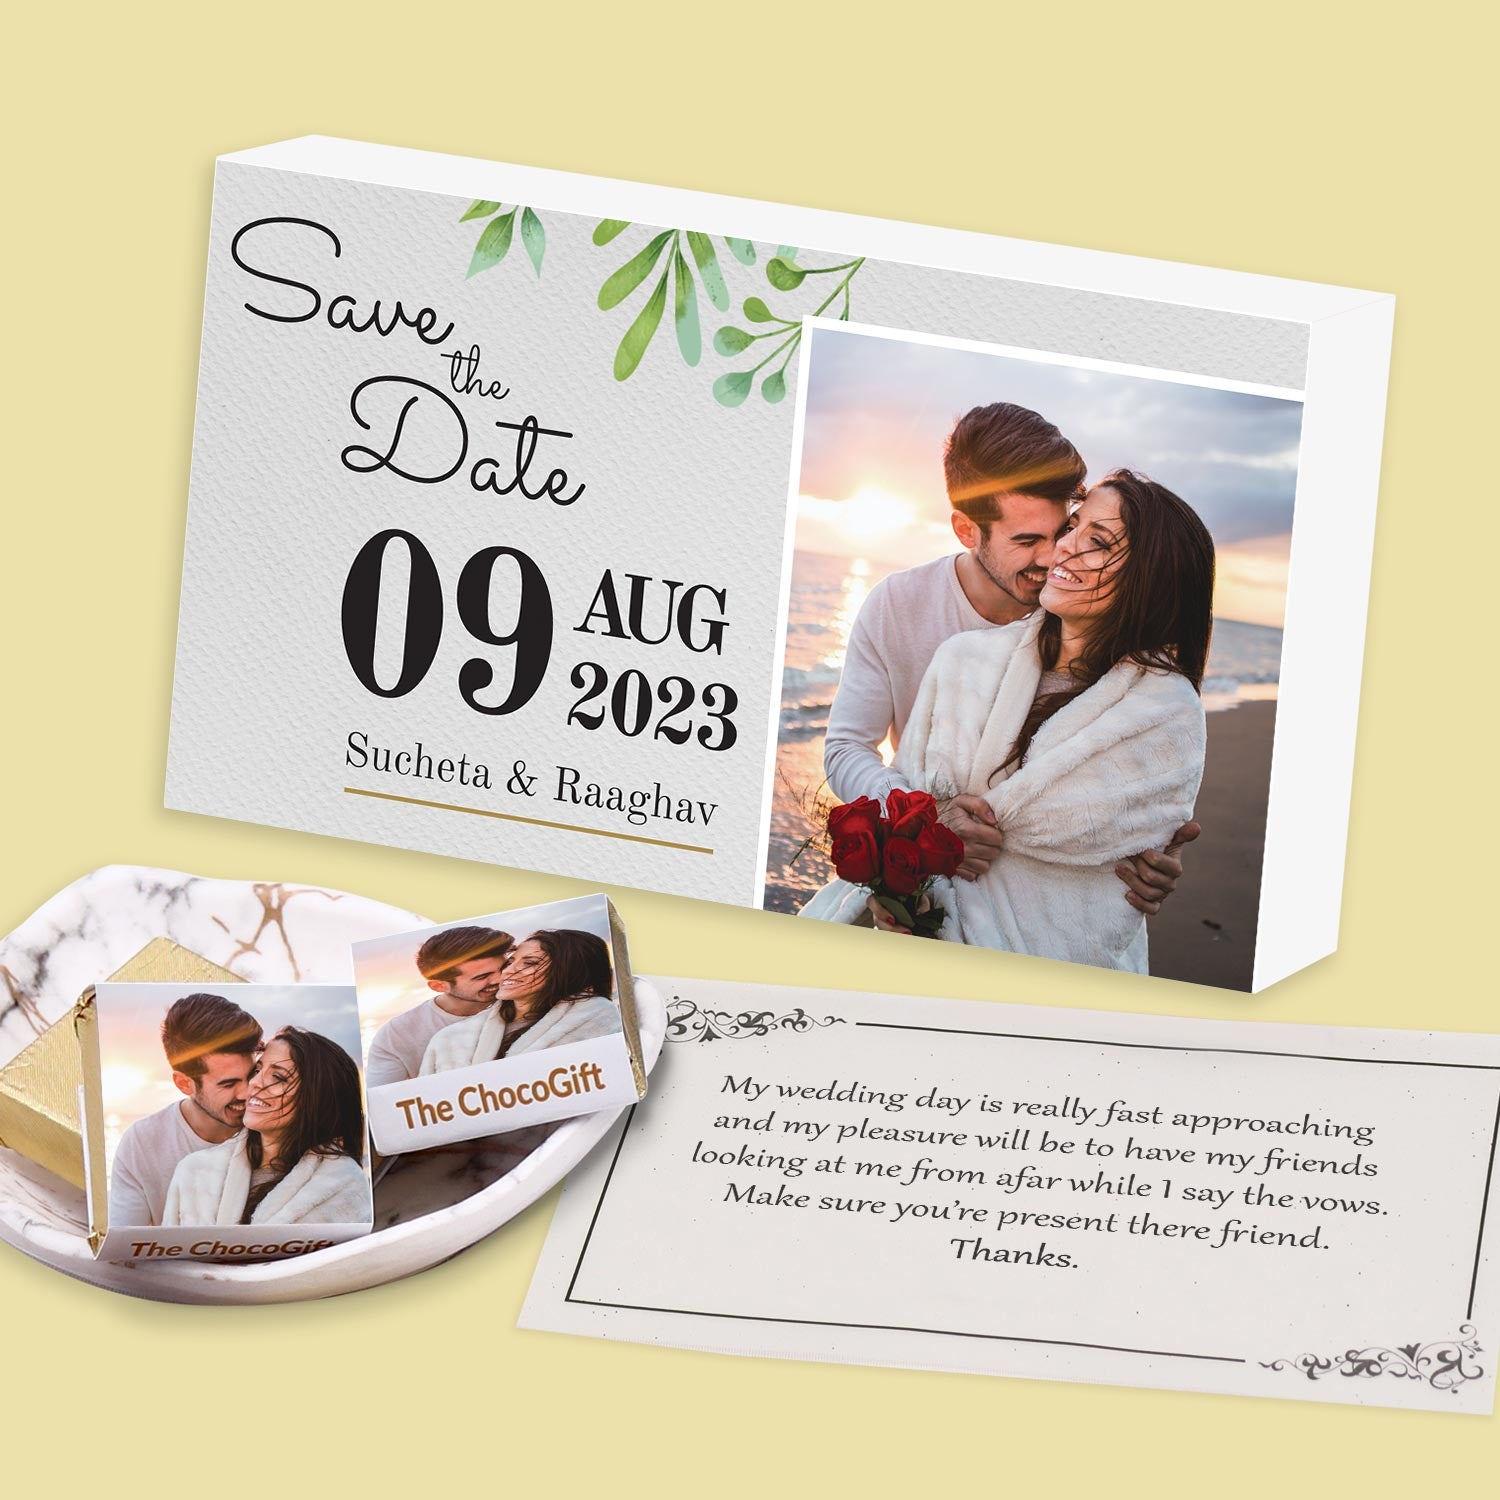 Save the Date personalised wrapped chocolates invite